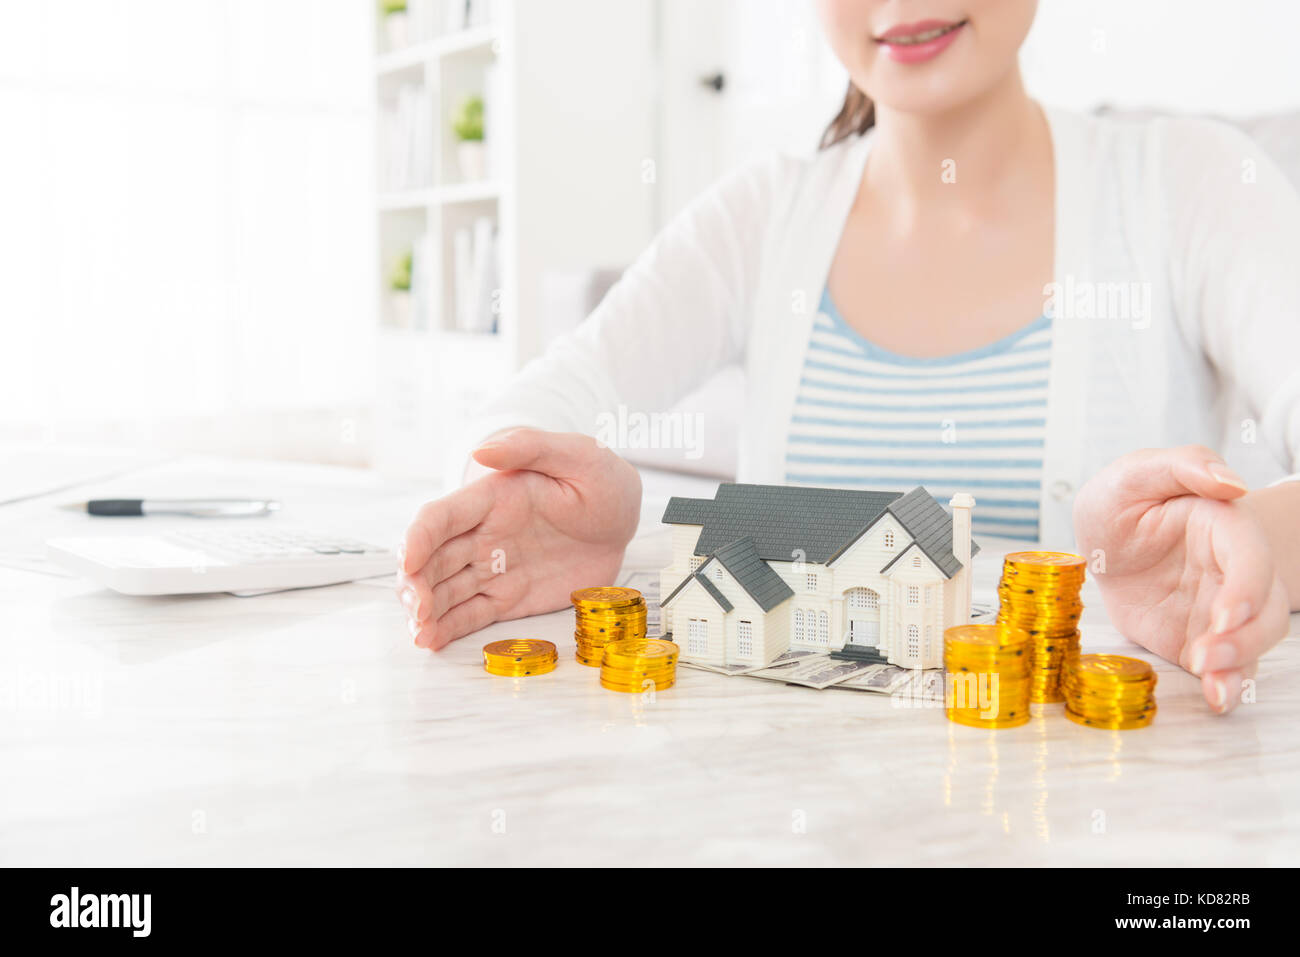 sweet smiling lady showing house model with gold coin stock displaying using personal saving deposit investment estate concept. Stock Photo